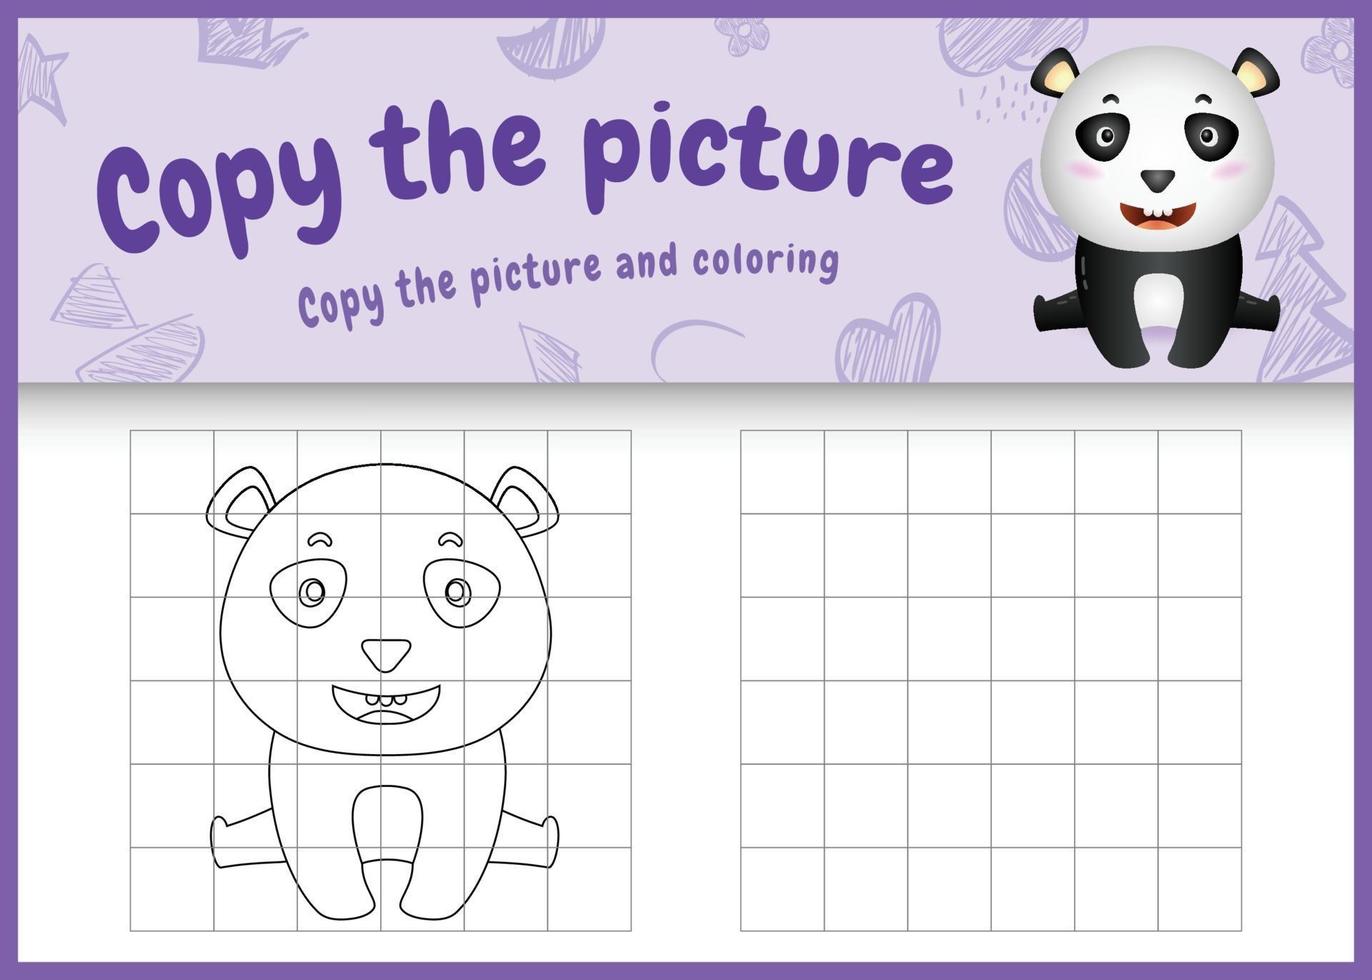 copy the picture kids game and coloring page with a cute panda character illustration vector